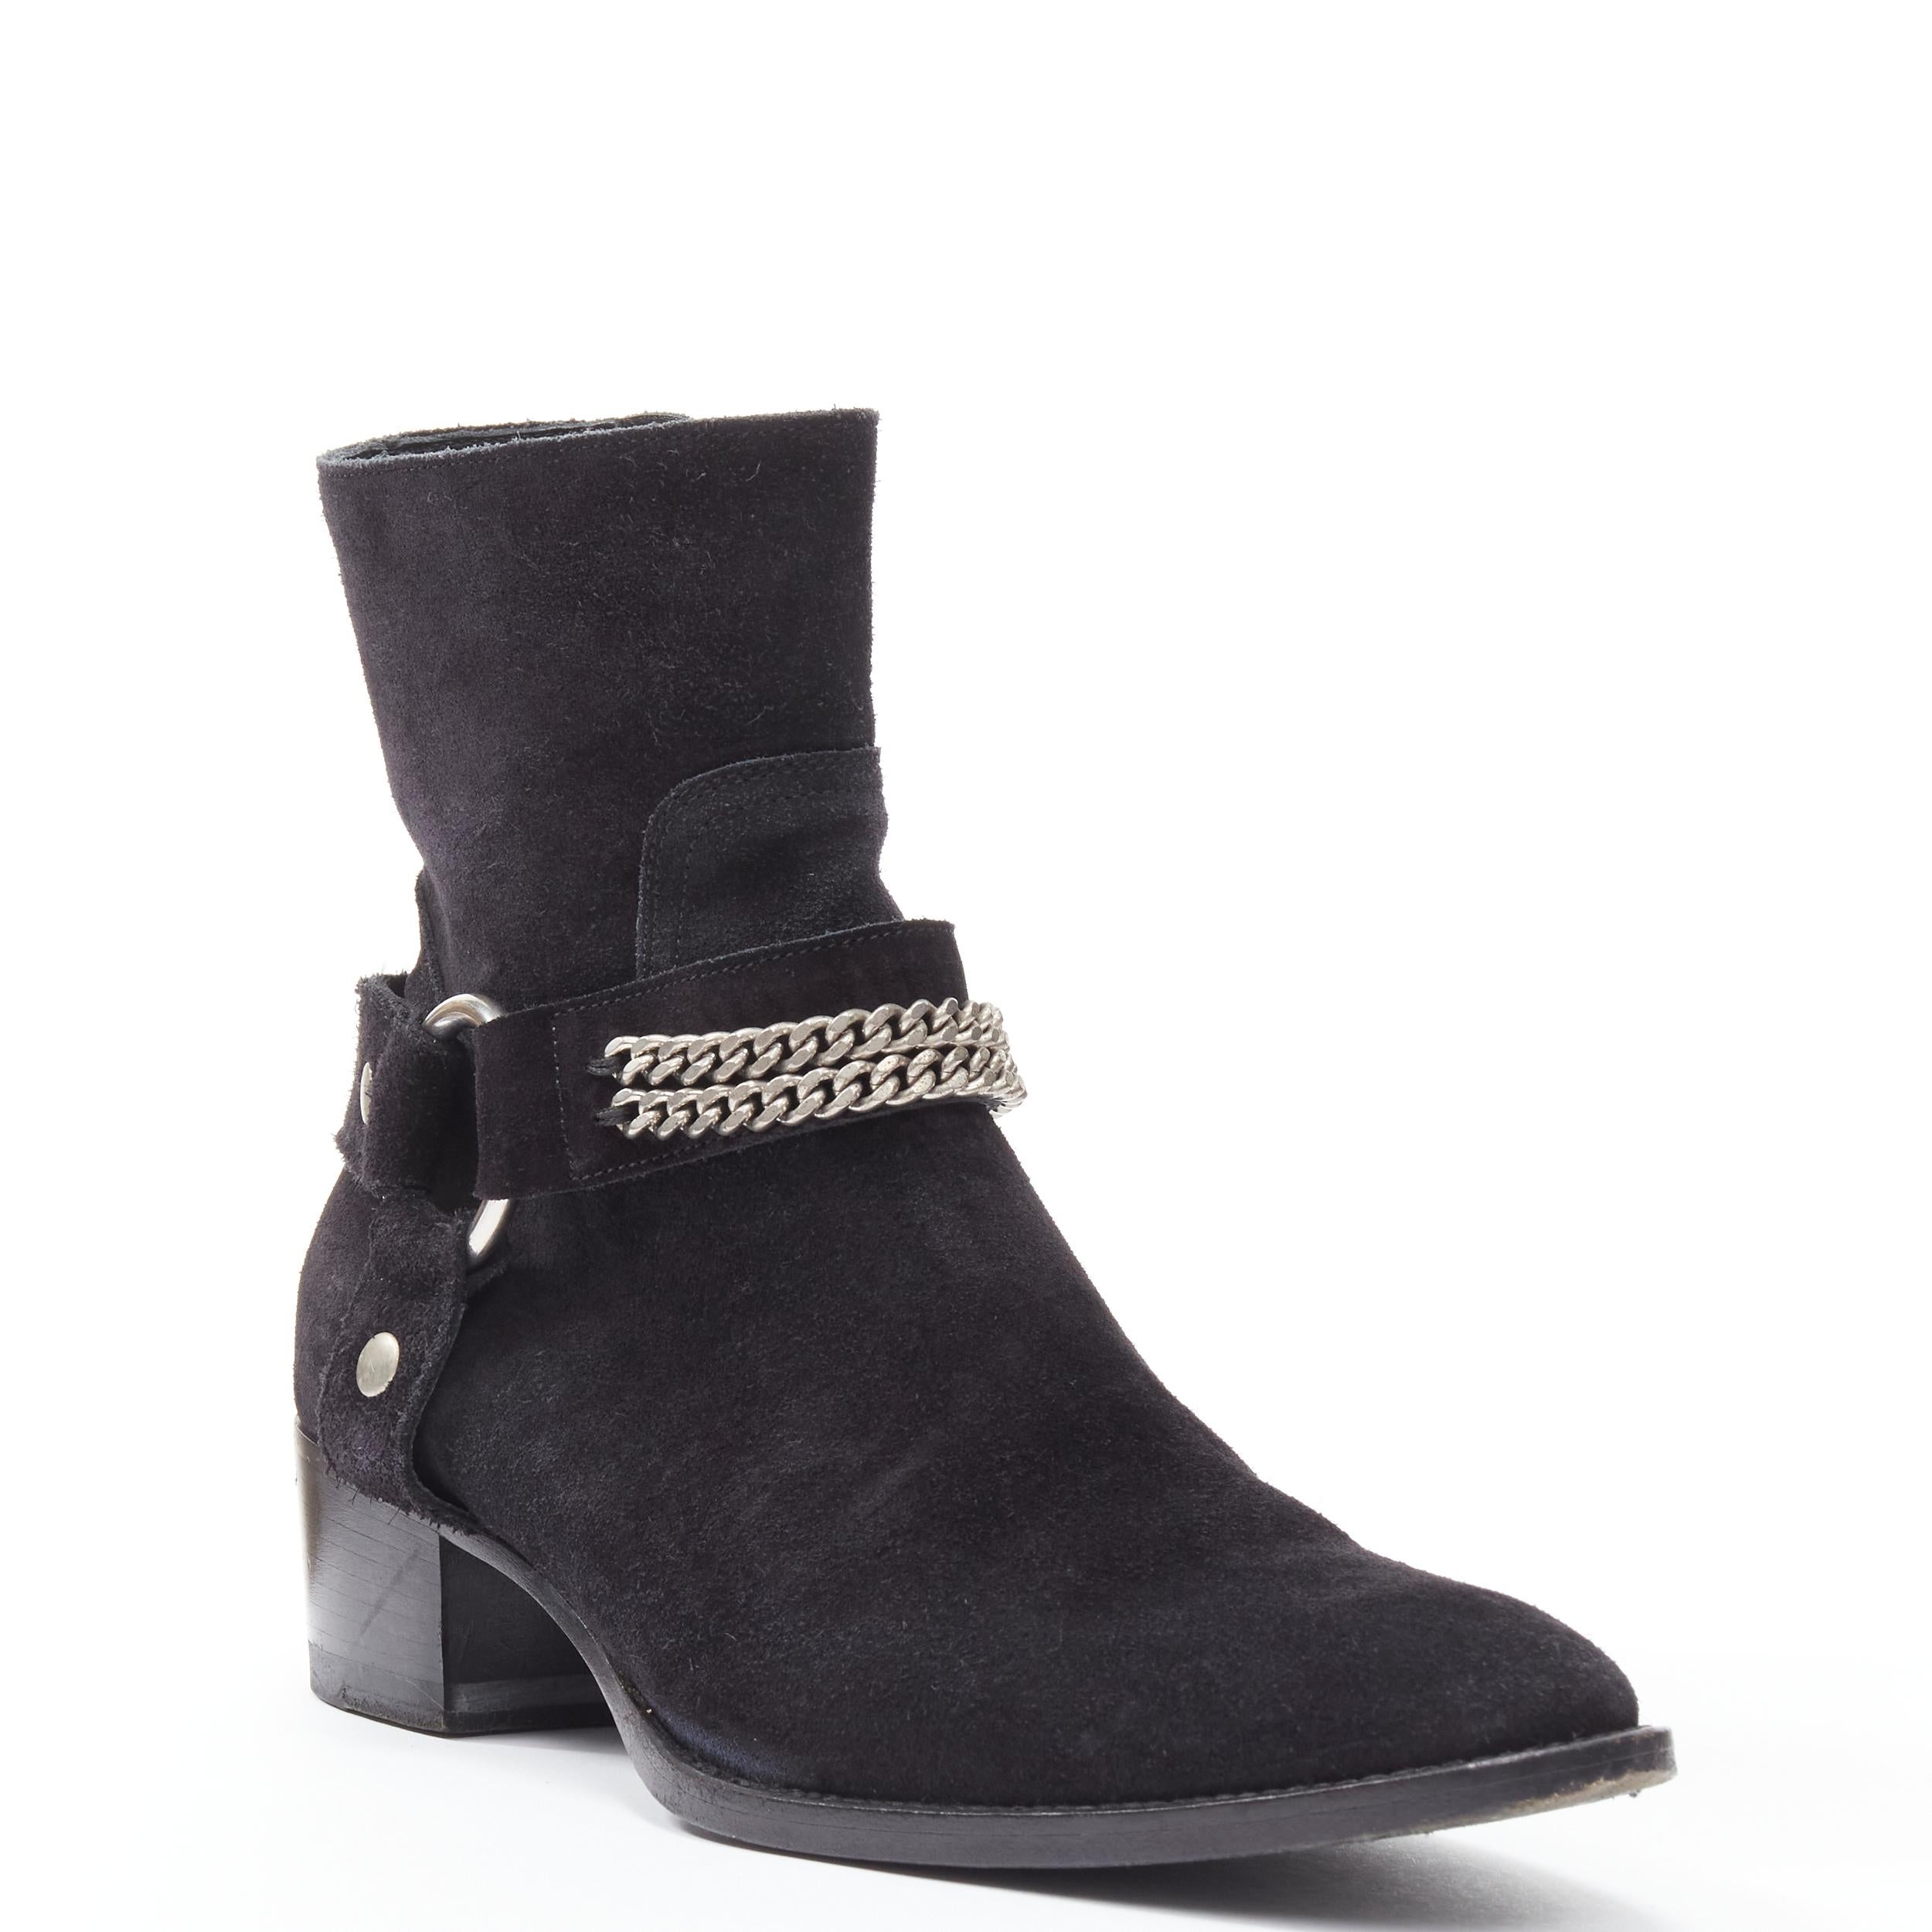 SAINT LAURENT Wyatt 40 black suede silver chain harness ankle boot EU36.5 
Reference: TGAS/B01837 
Brand: Saint Laurent 
Material: Suede 
Color: Black 
Pattern: Solid 
Closure: Zip 
Extra Detail: Black suede upper. Silver-tone hardware. Chained